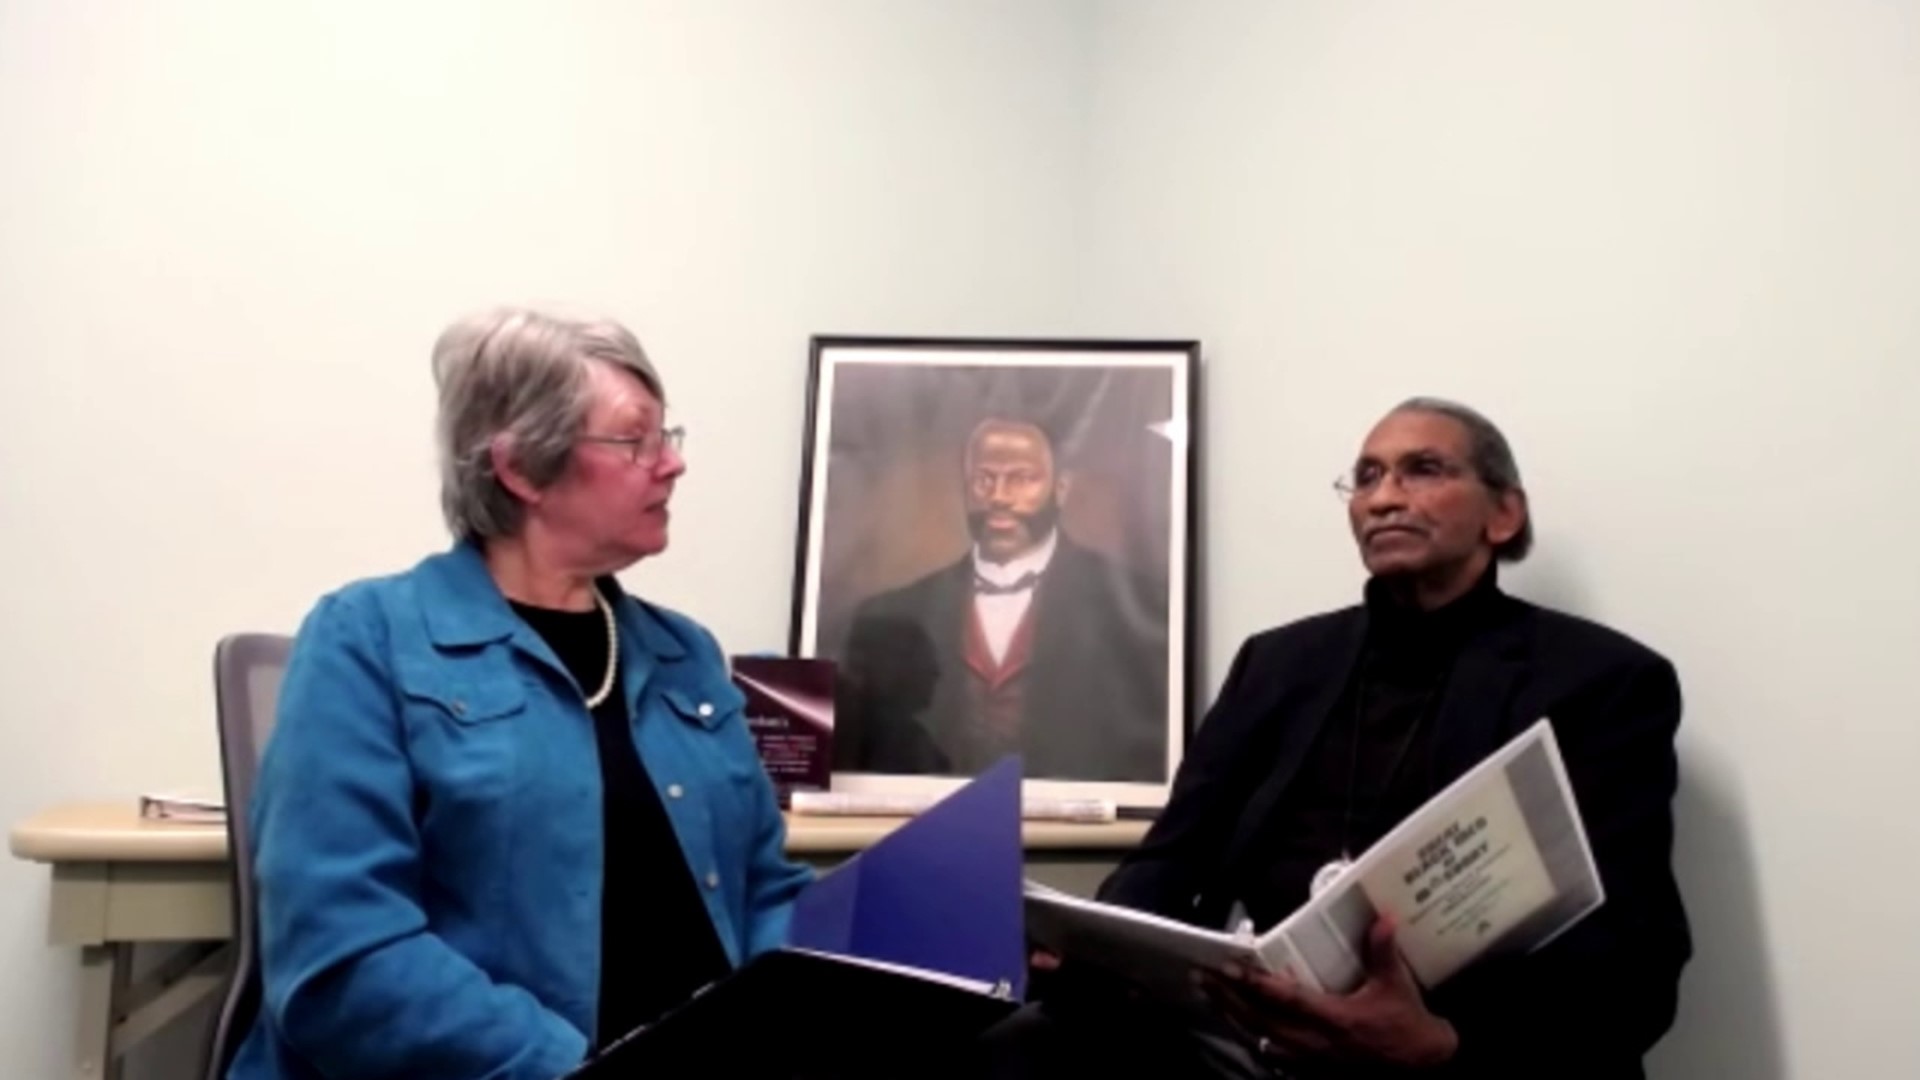 Two historical black figures with ties to Susquehanna County were recognized on Tuesday.